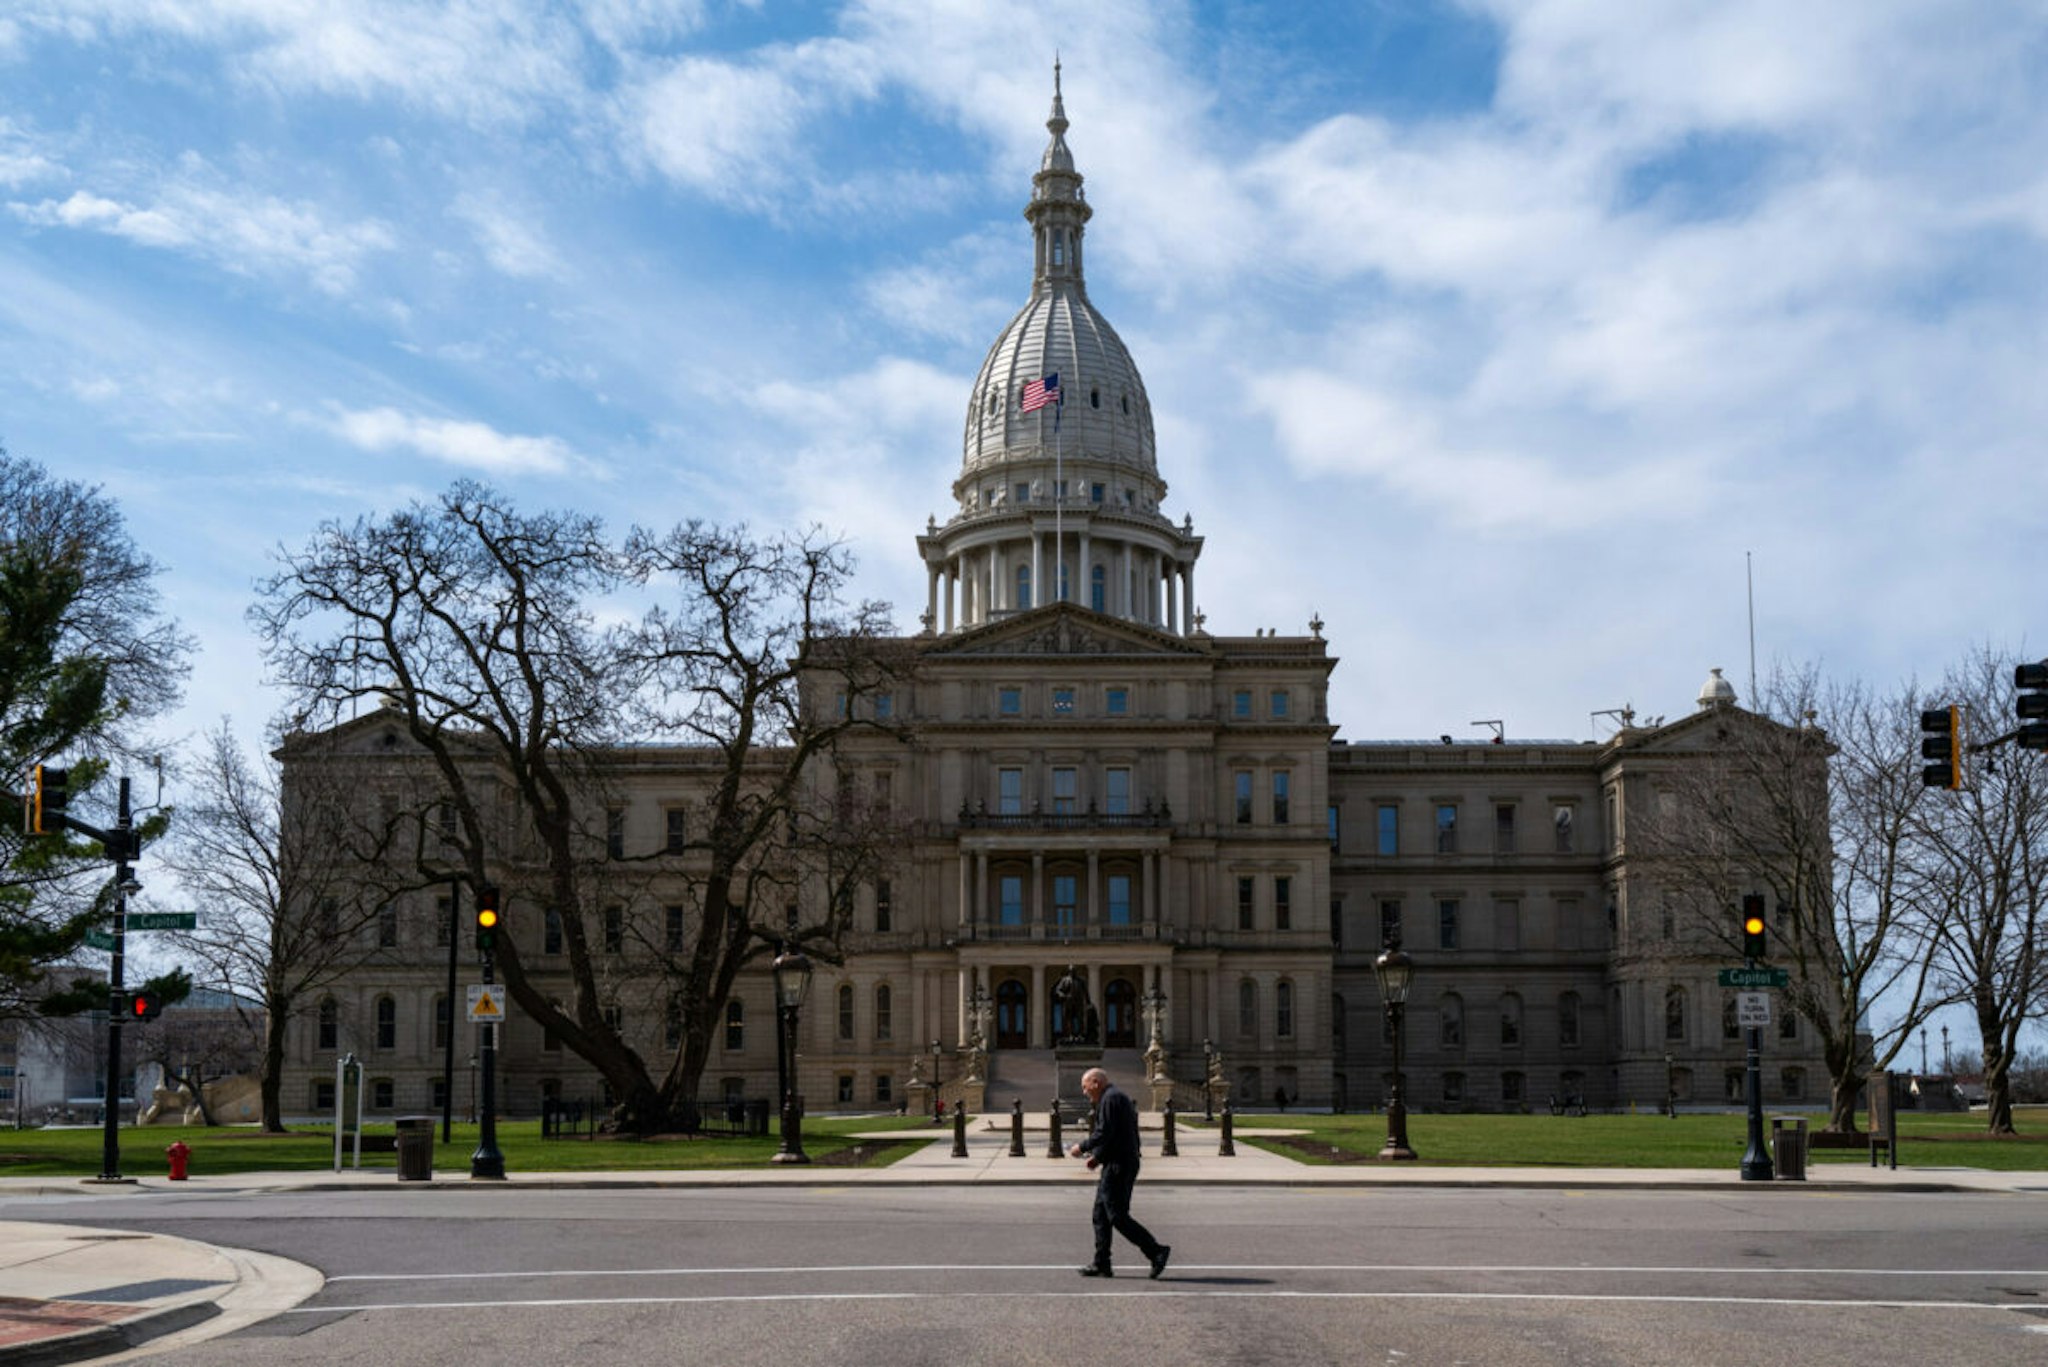 LANSING, MICHIGAN - APRIL 01: A man crosses the street in front of the state capital building in downtown Lansing on April 01, 2024 in Lansing, Michigan. According to recent state employment data projections, the number of jobs in Michigan is not expected grow over the next seven years as the state struggles with population growth and an auto industry facing challenges. In population growth, Michigan ranks 49th in the country ahead of only West Virginia.